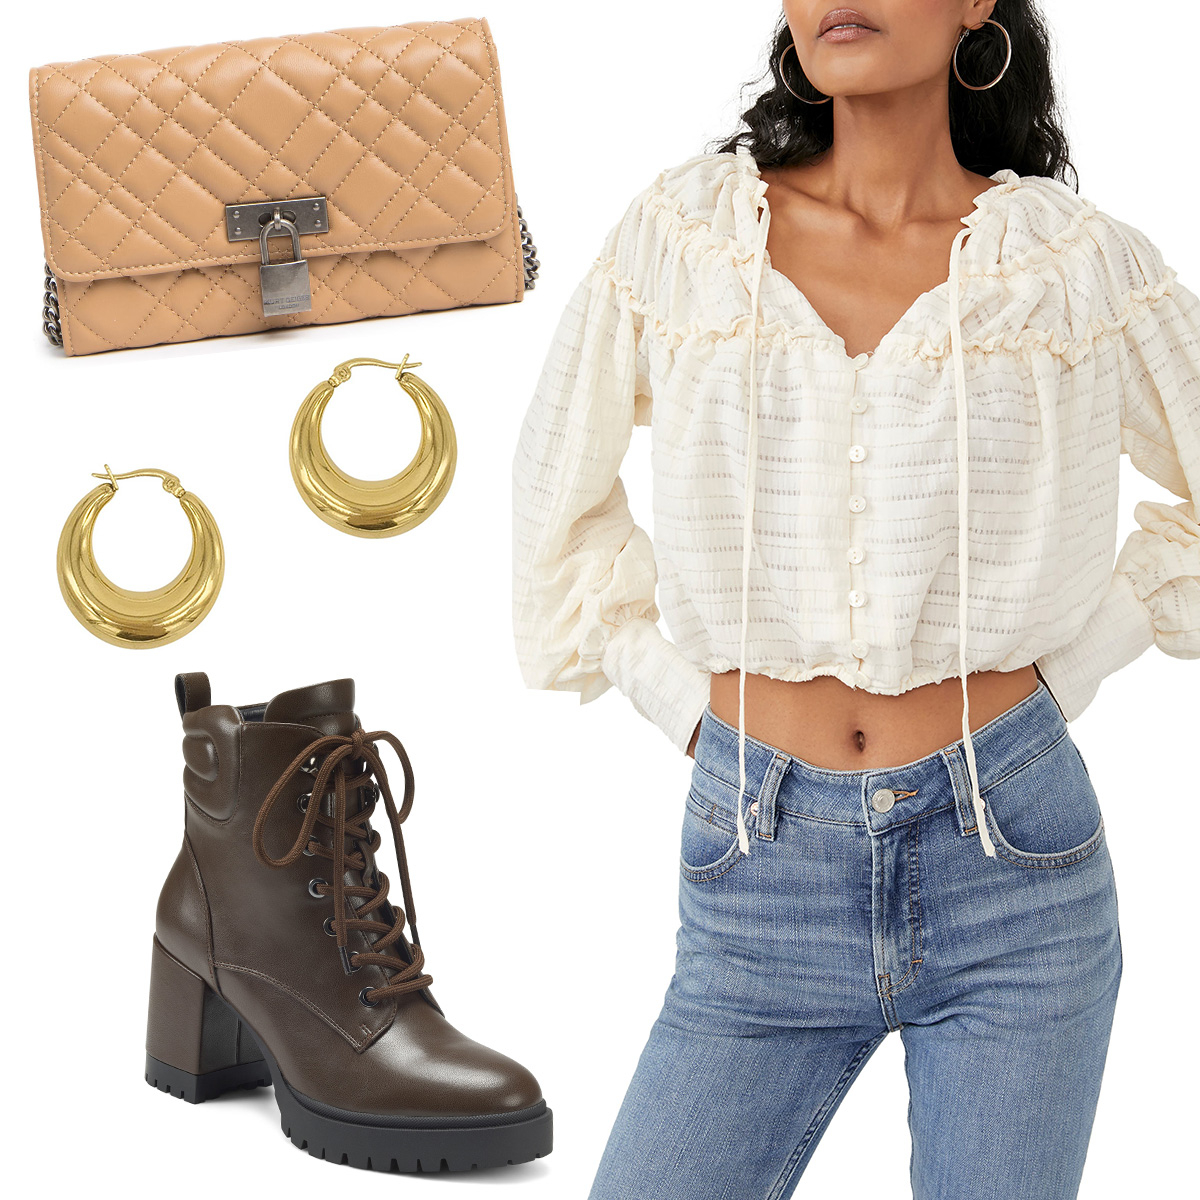  FitOOTLY Spring New European And American,cheap summer items, clearance warehouse deals,warehouse open box deals,clearance items for women  under 5 dollars,fashion under 10 dollars women,deals of : Clothing, Shoes &  Jewelry